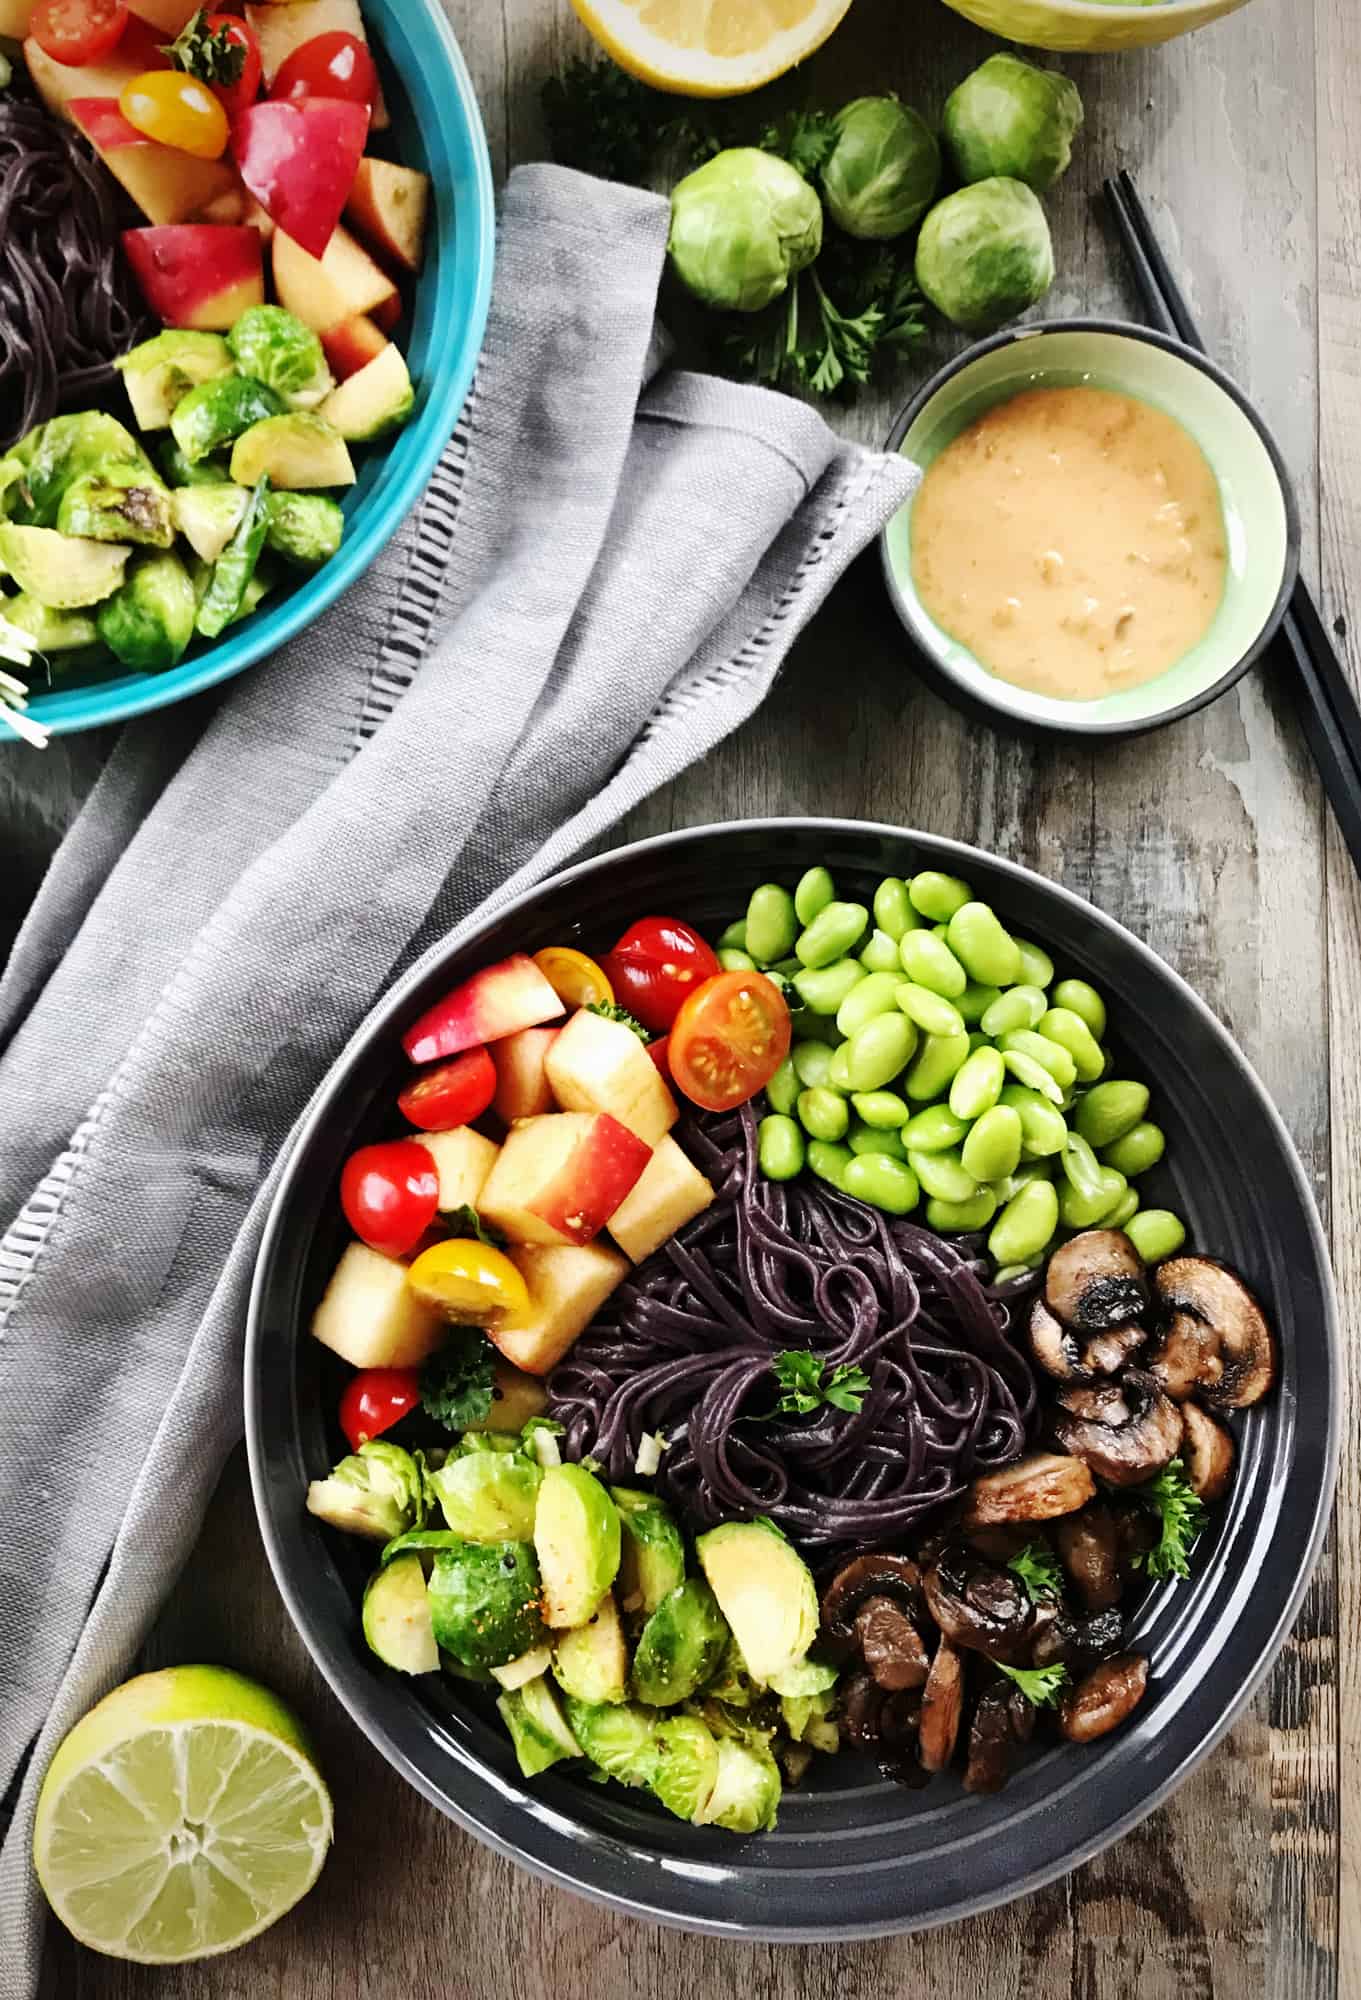 Vegan buddha bowl with black rice noodles. Gluten-free as well. What does 100 grams of sugar a day look like? It's not what you think. With the new nutrition labelling rolling out, what do you navigate the new nutrition facts label and %DV? and how a 100g-sugar menu can still be healthy?